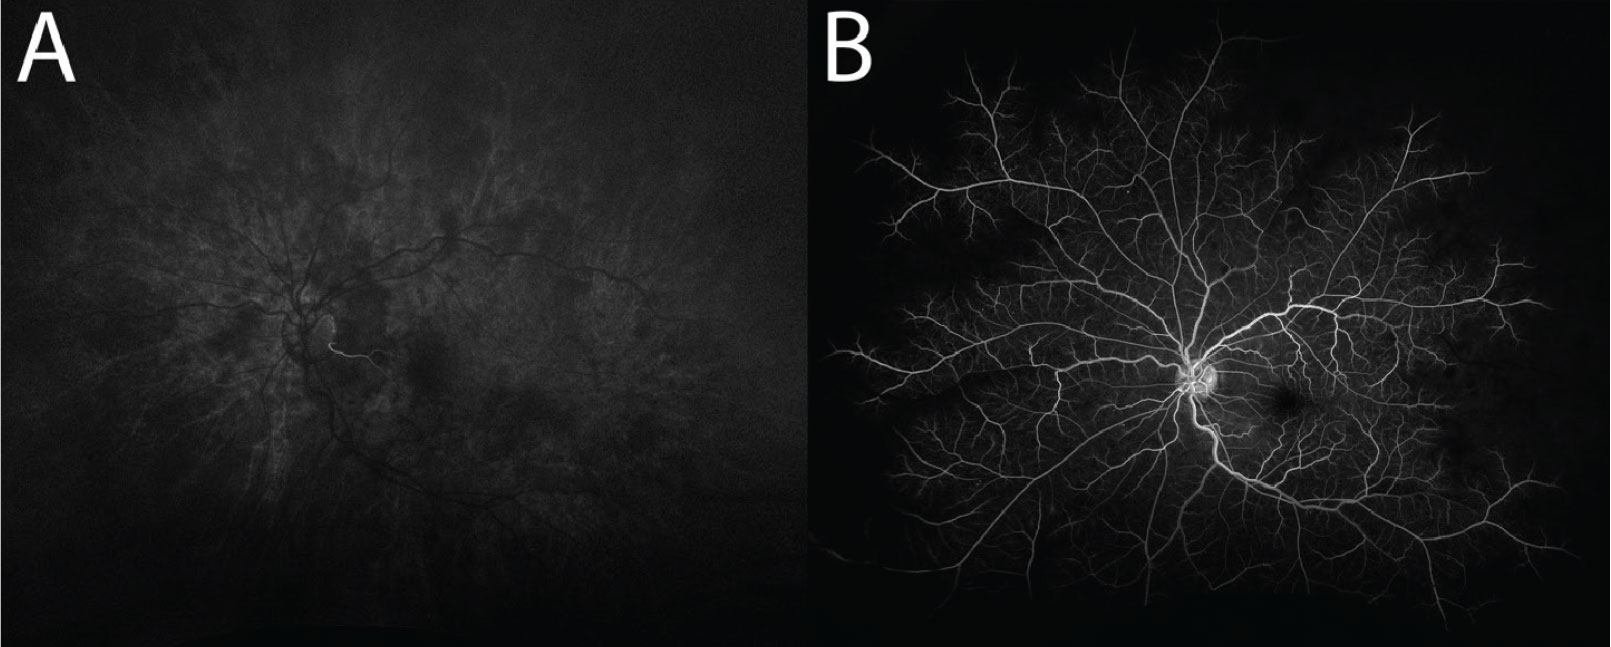 (A) Delayed first appearance of choroidal flush, captured at 26 seconds. Note the filling of a small cilioretinal artery, which is supplied by the choroid. (B) Delayed and incomplete filling of the retinal arteries, captured at 69 seconds. There are also a few microaneurysms present.